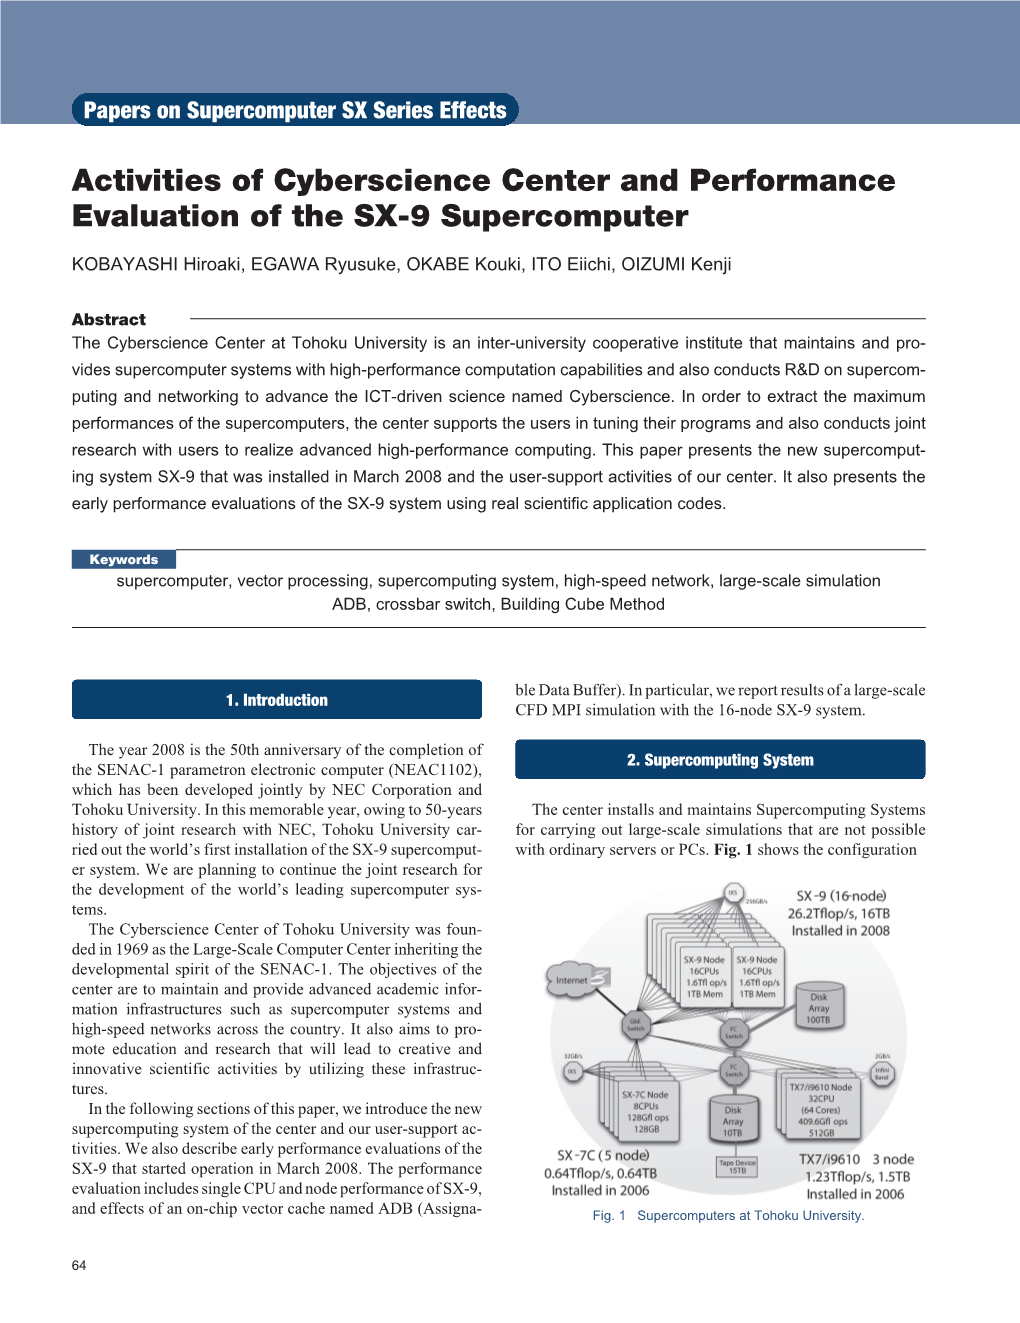 Activities of Cyberscience Center and Performance Evaluation of the SX-9 Supercomputer